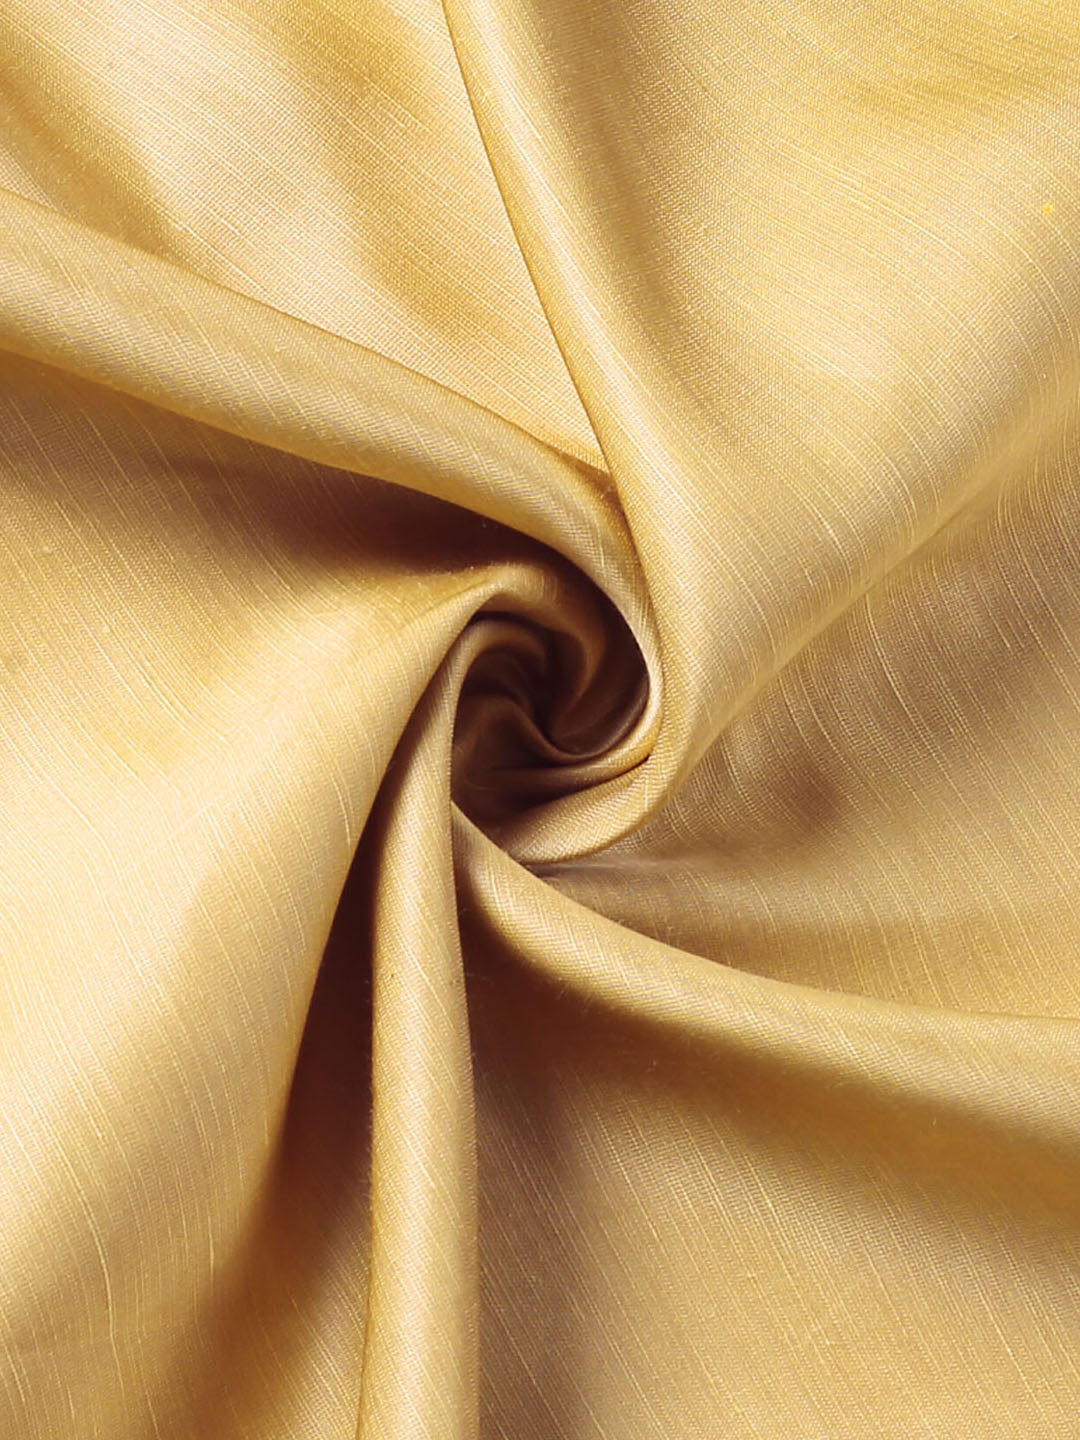 Wholesale Gold-Antique Satin Fabric 40 Yards Roll For, 58% OFF